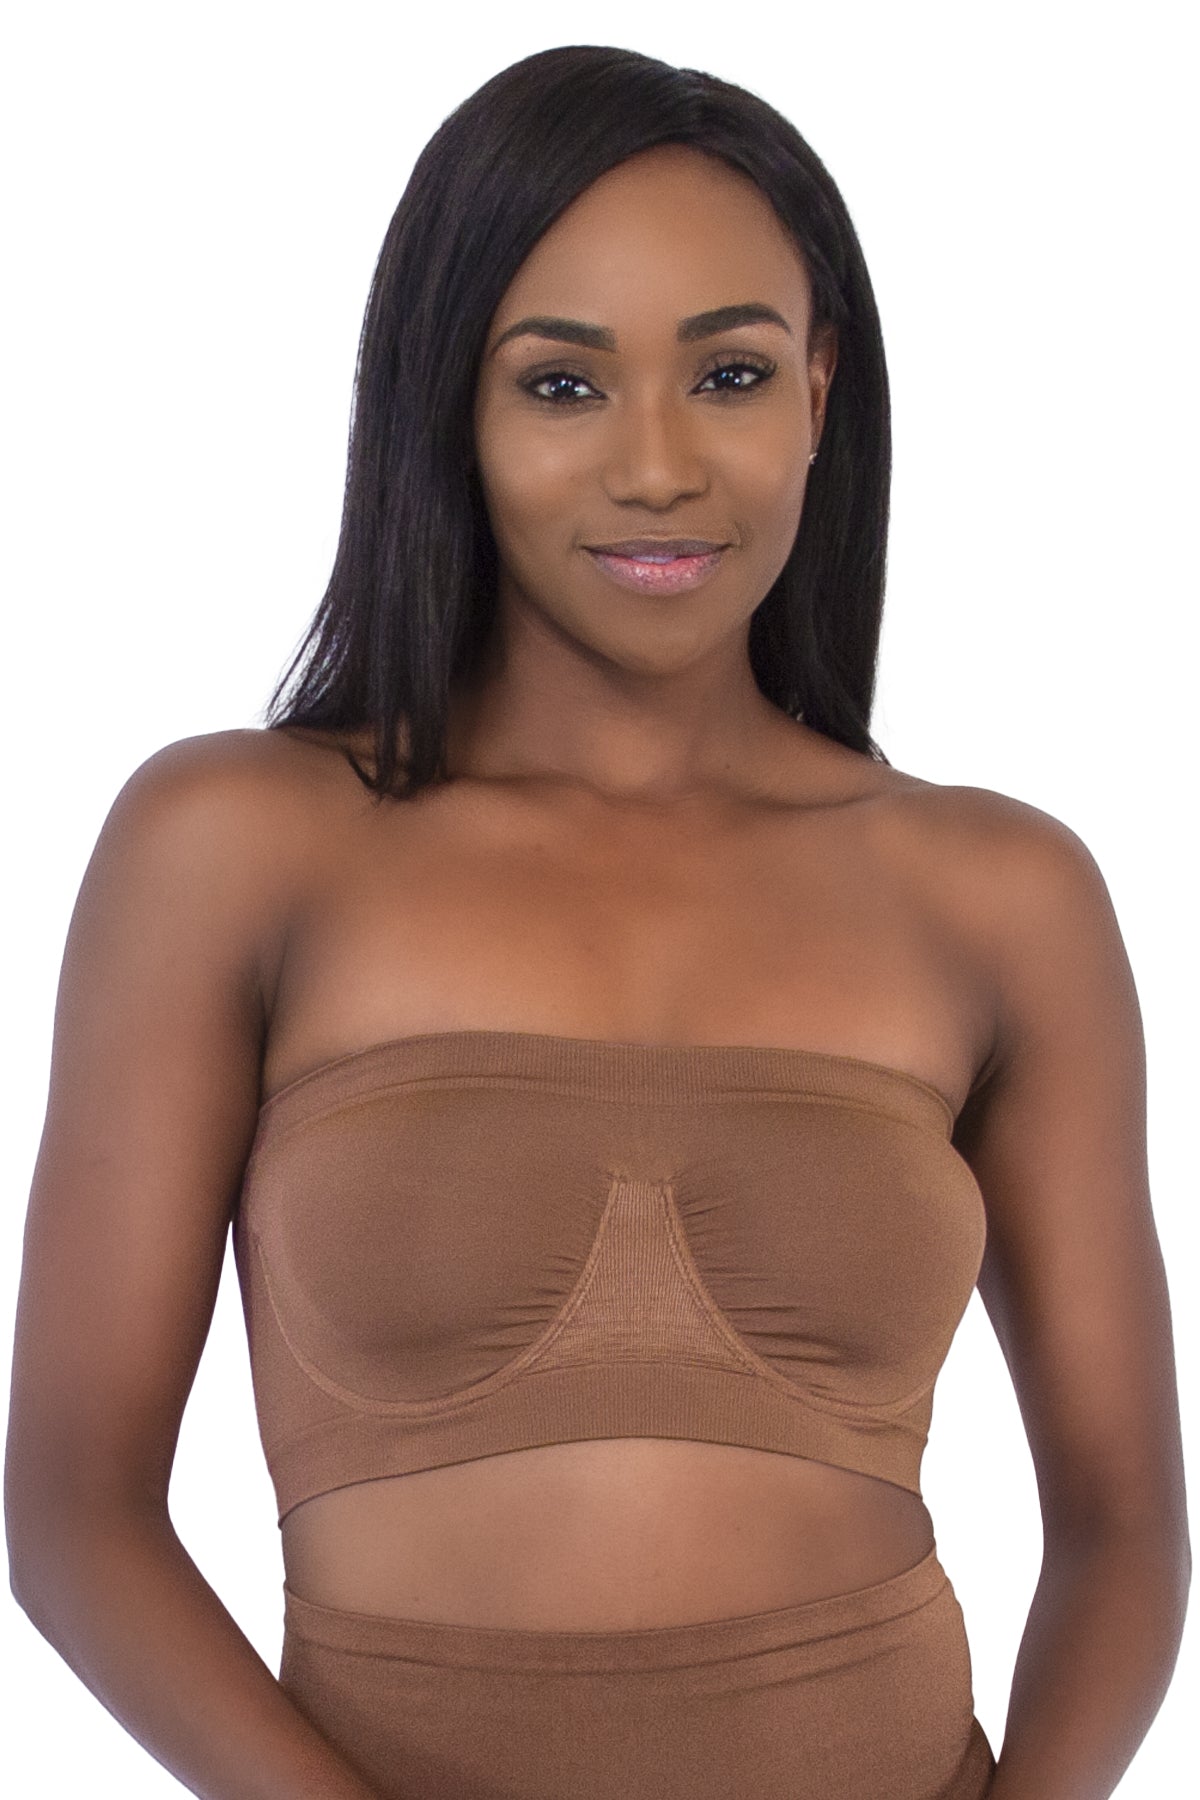 Exclare Women's Invisible Seamless Unpadded Underwire Bandeau